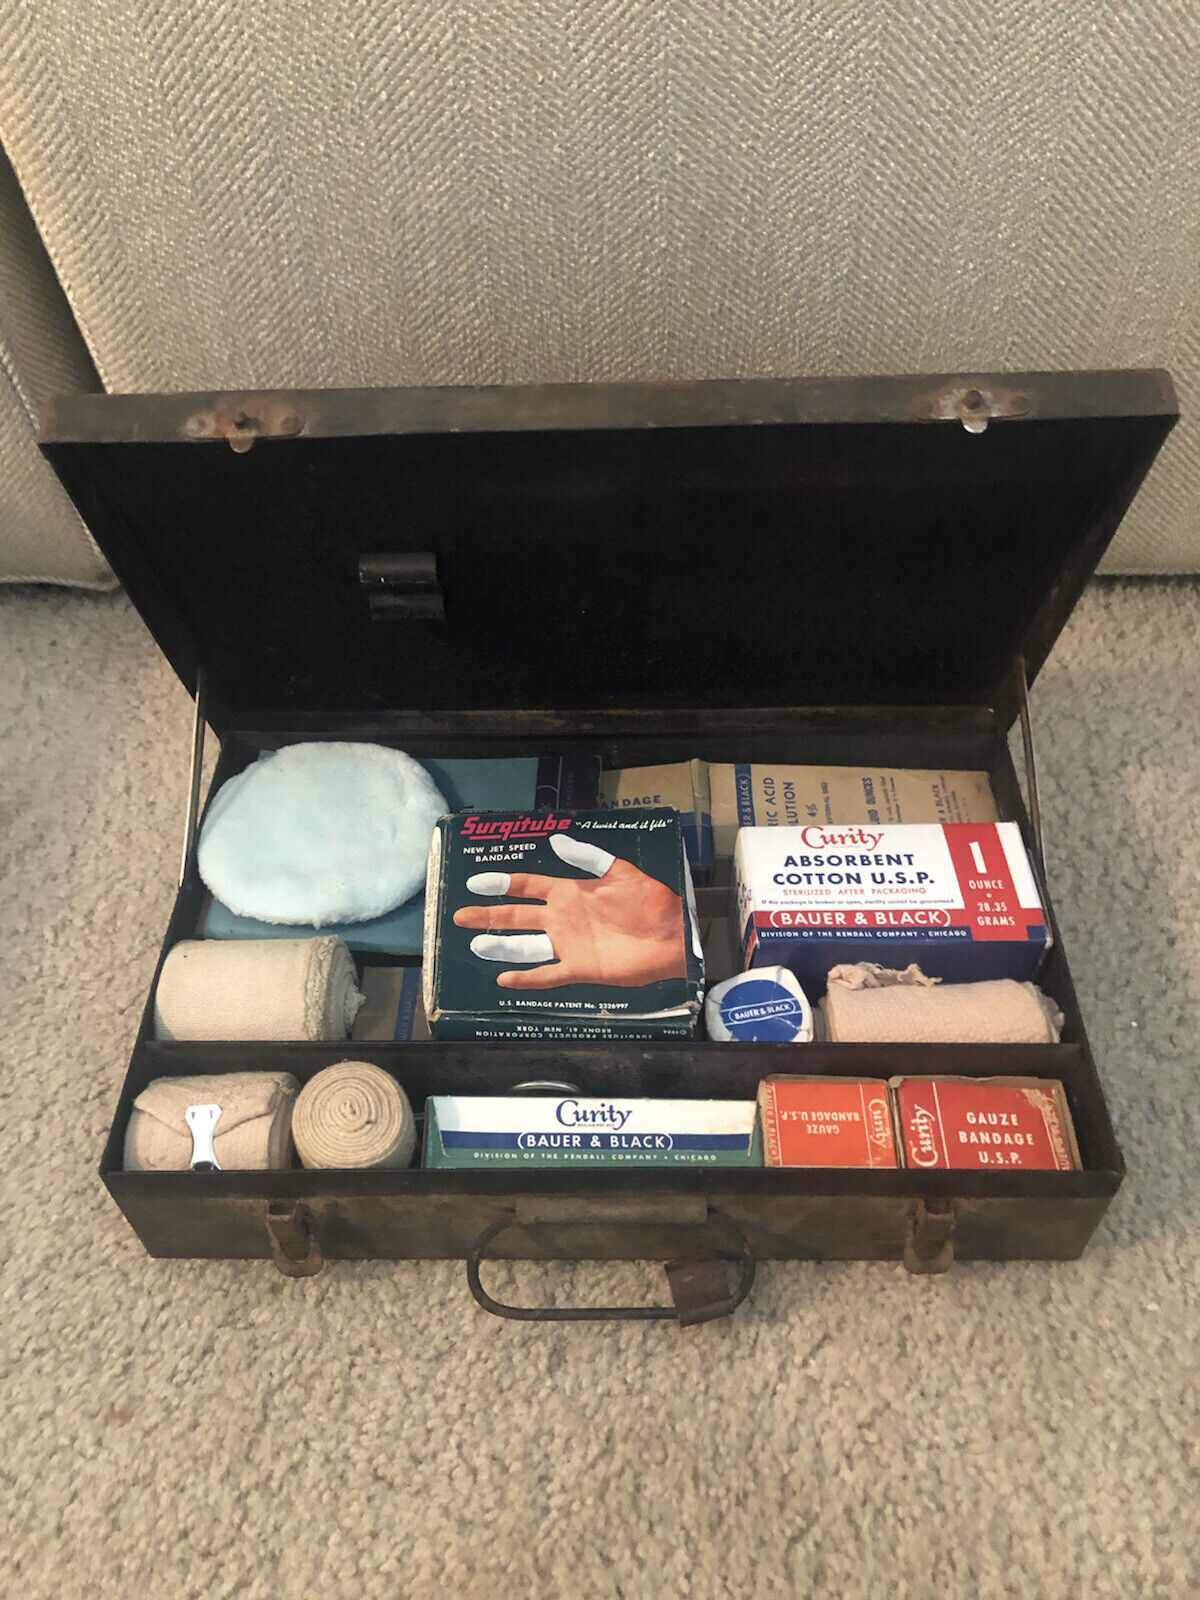 Vintage CURITY First Aid Kit Bauer & Black FULL of ORIGINAL CONTENTS 1940's